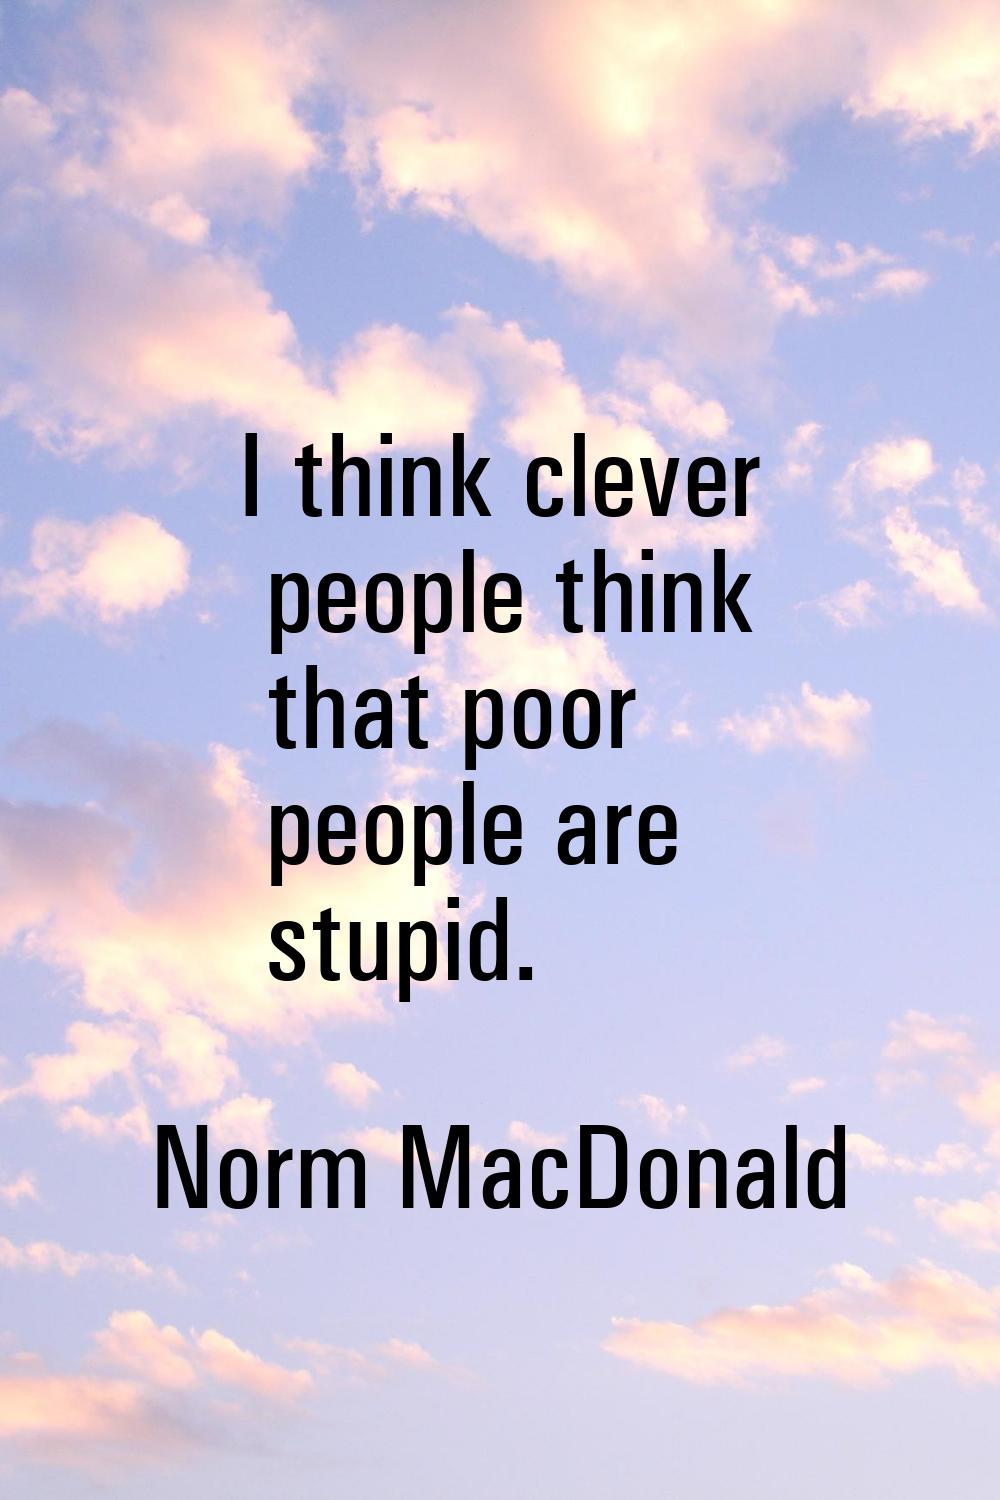 I think clever people think that poor people are stupid.